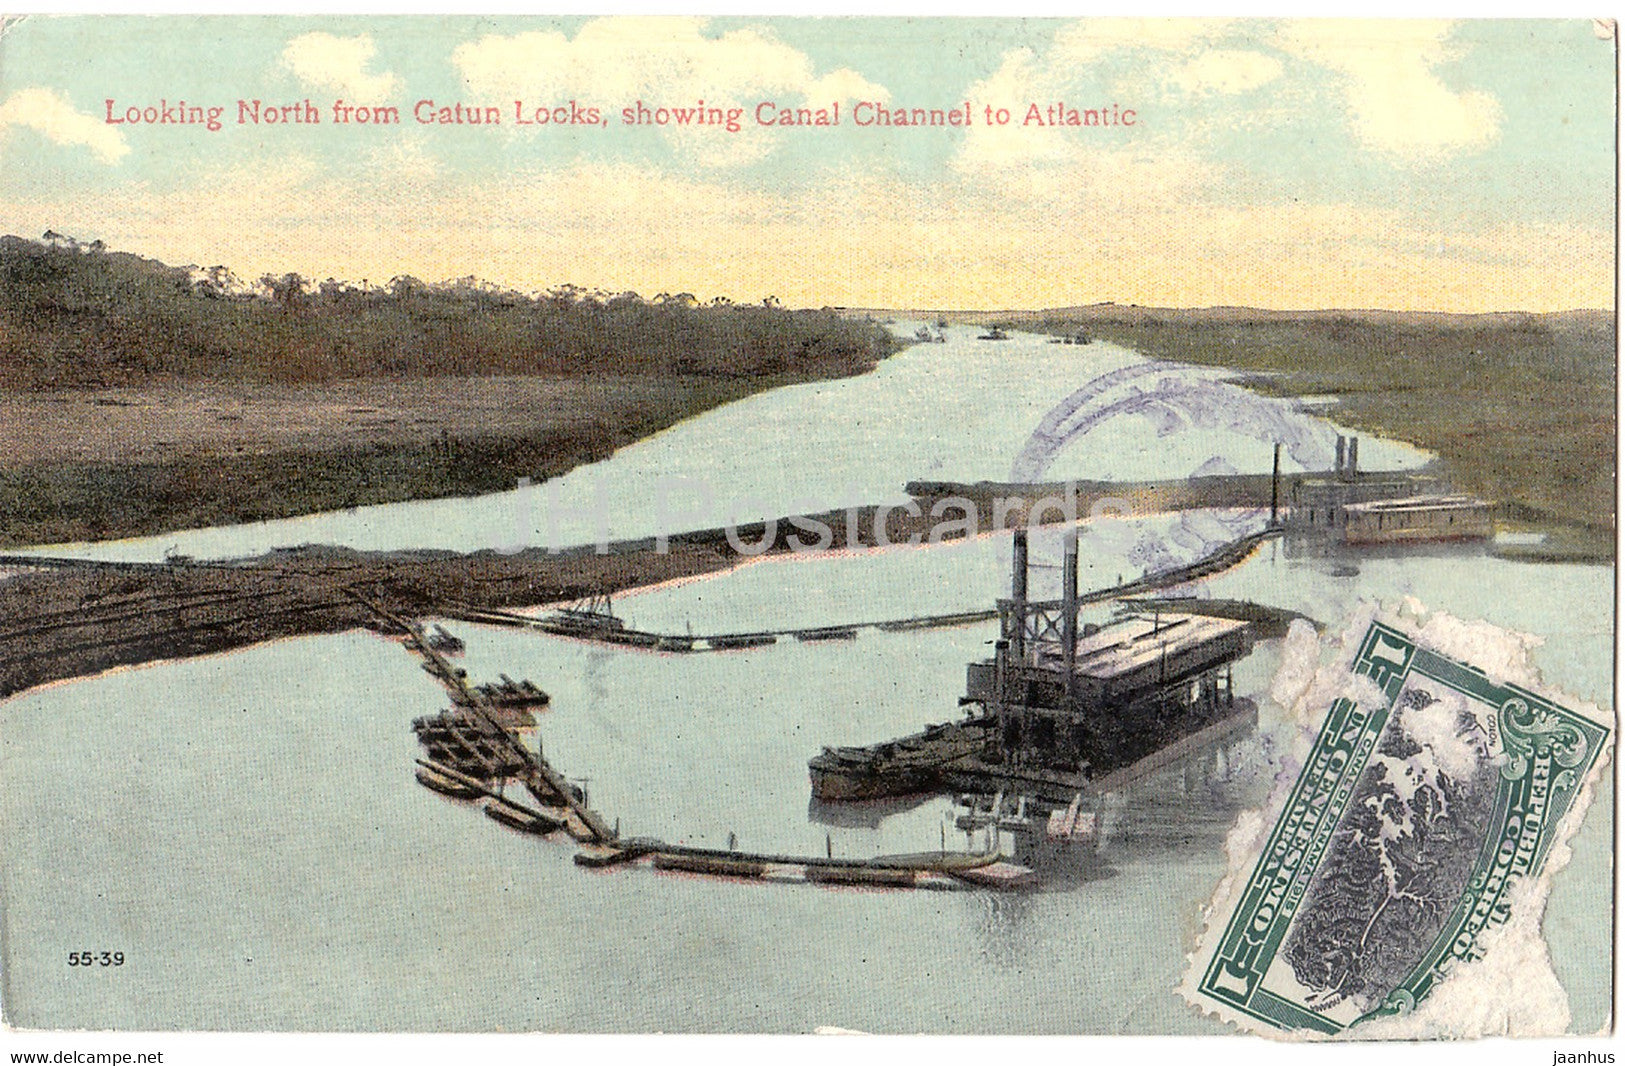 Panama - ooking North from Gatun Locks showing Canal Channel to Atlantic - old postcard - Panama - unused - JH Postcards